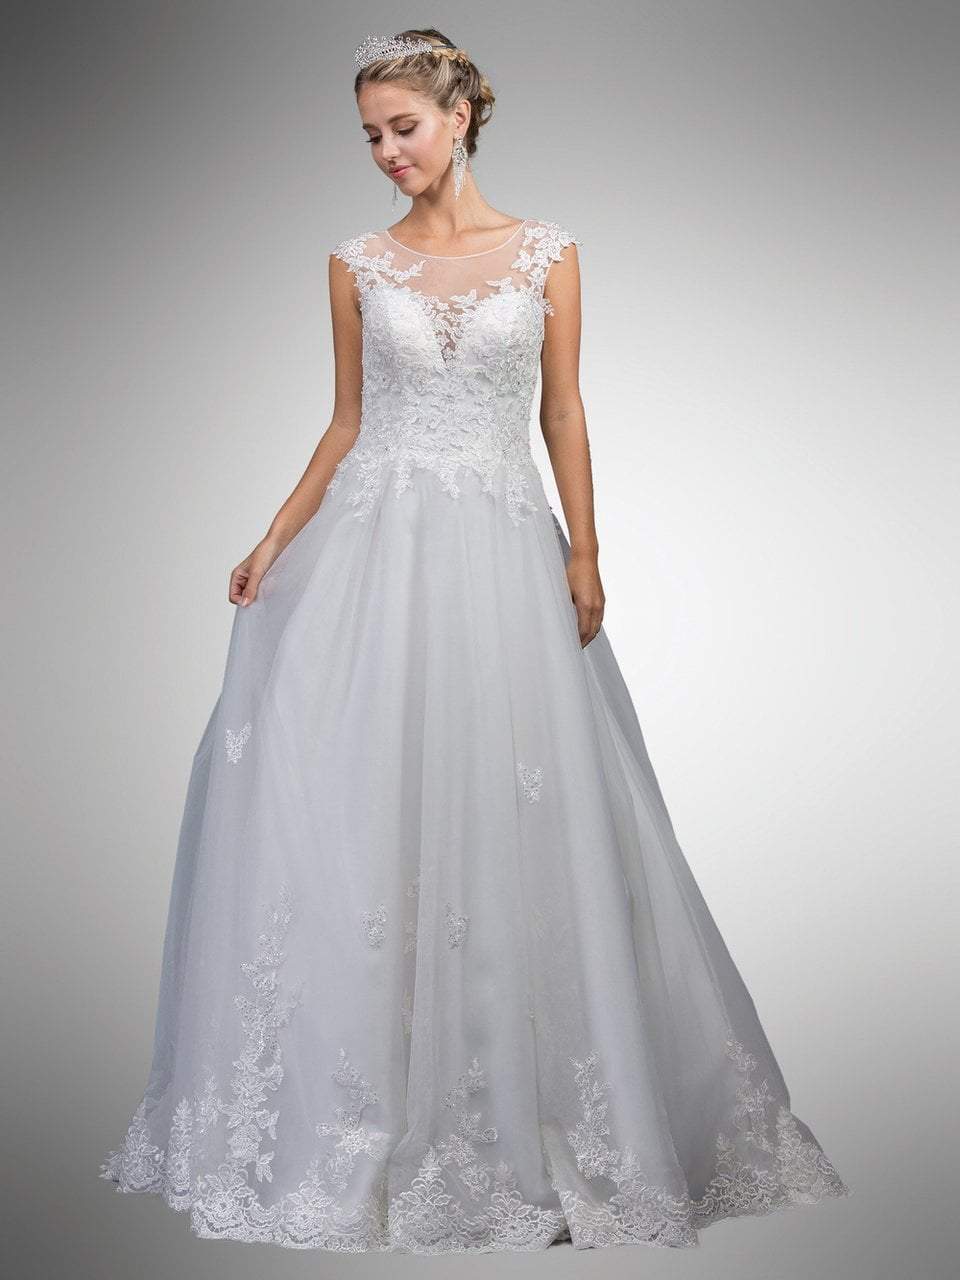 Image of Dancing Queen Bridal - 23 Cap Sleeve Illusion Floral Appliqued Ballgown